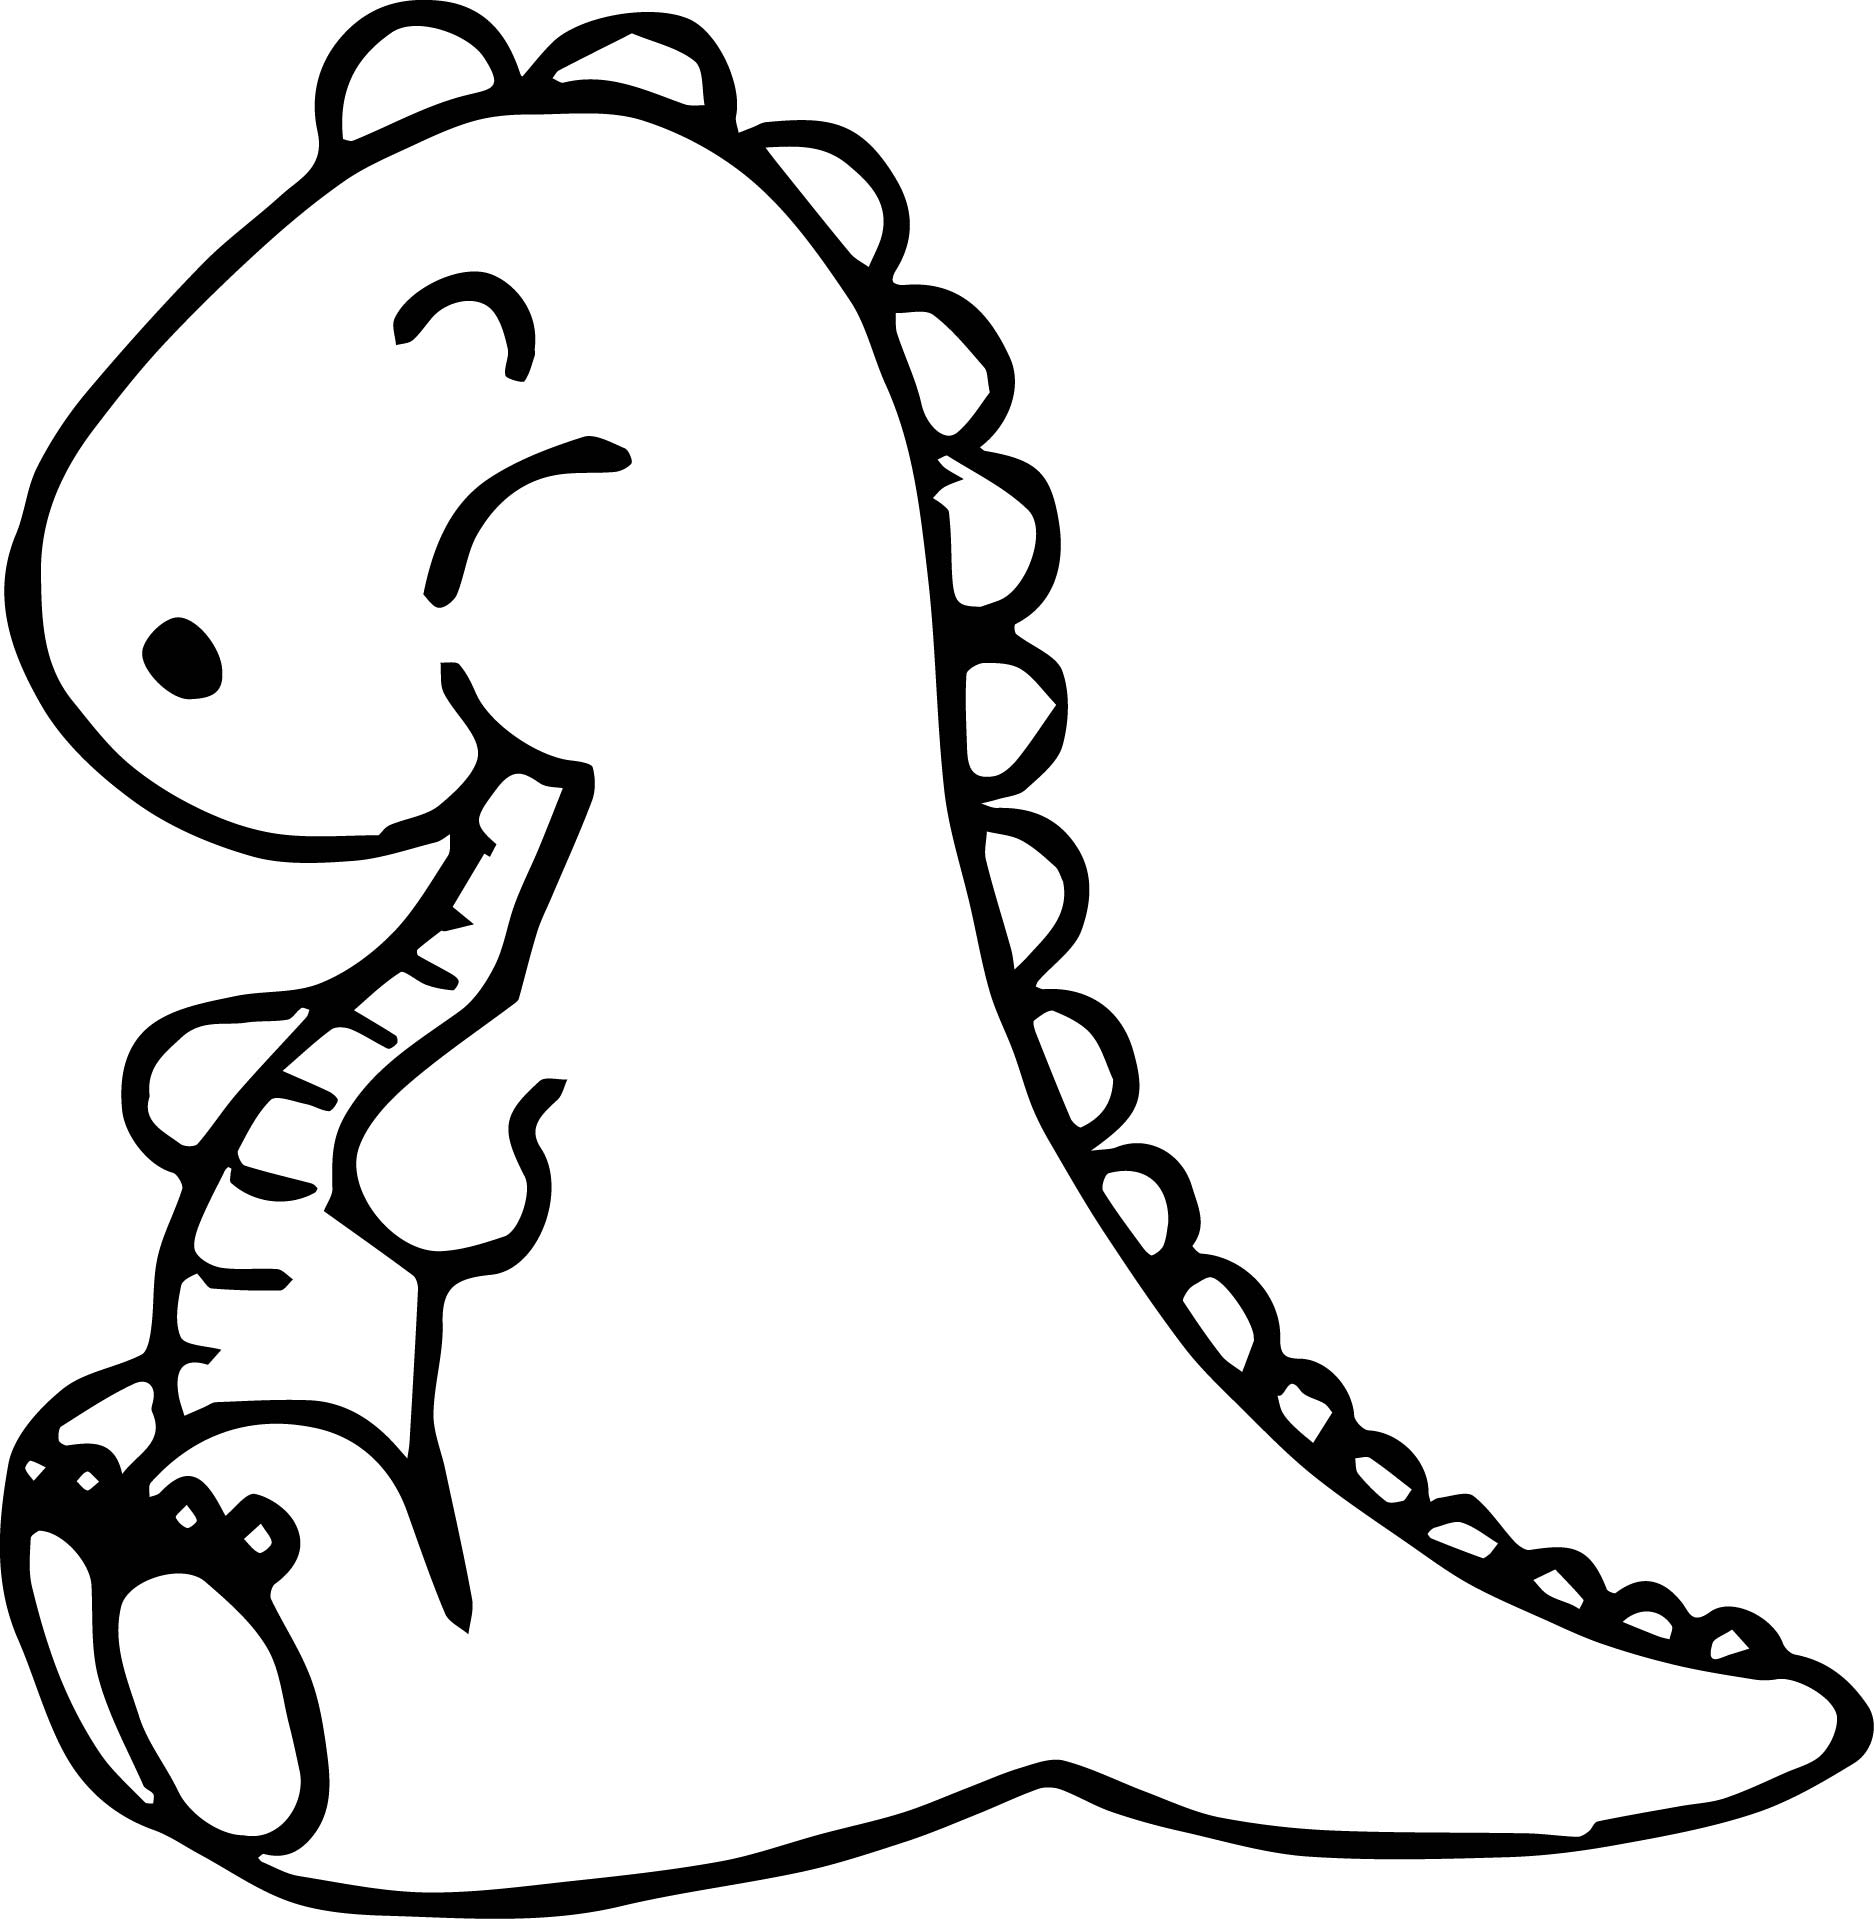 Free Baby Dinosaur Coloring Pages Coloring Pages 65280 The Best